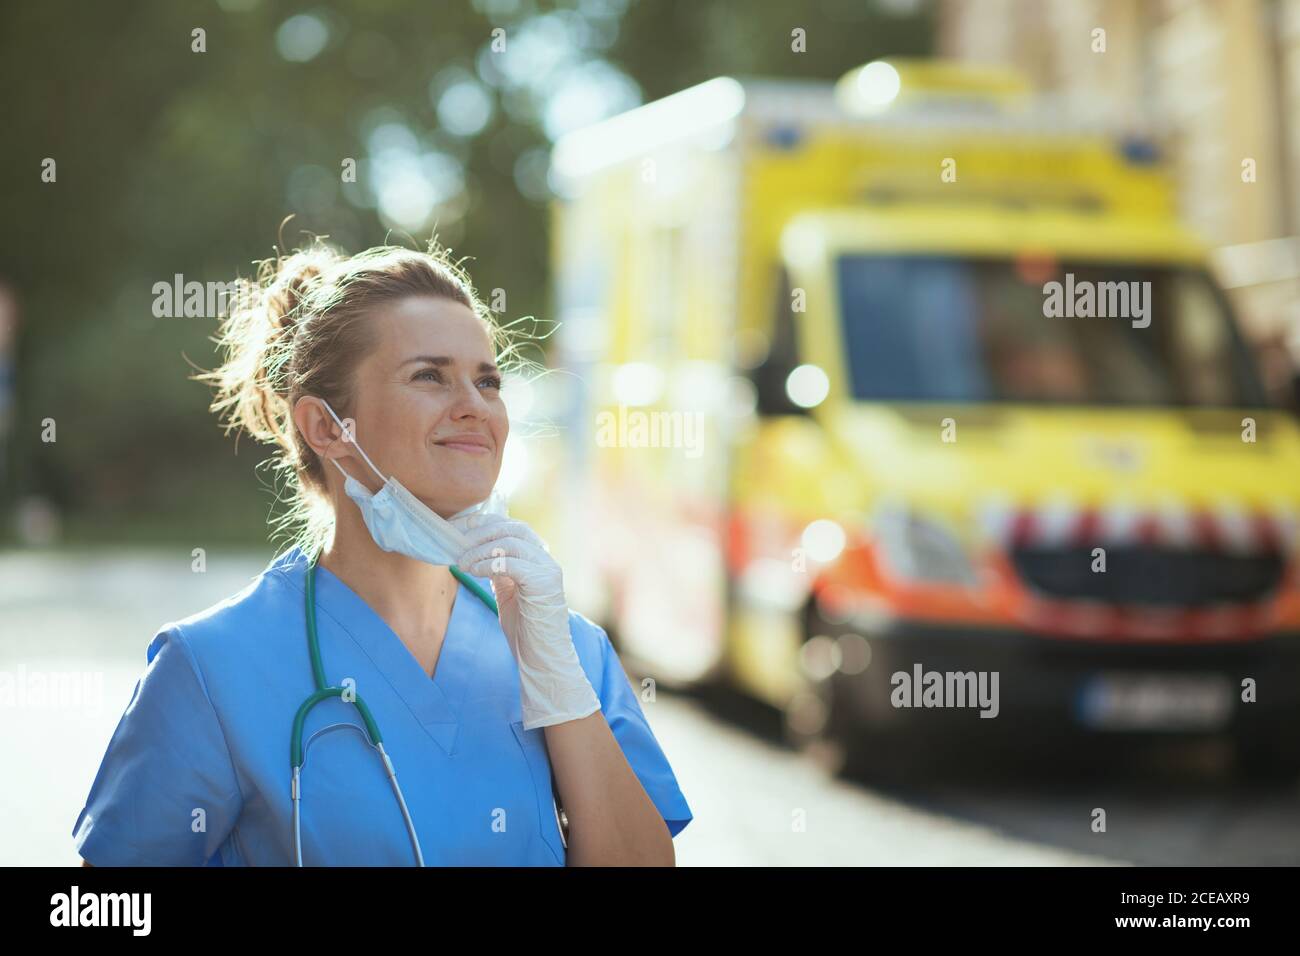 coronavirus pandemic. happy modern medical doctor woman in scrubs with stethoscope and medical mask breathing outside near ambulance. Stock Photo